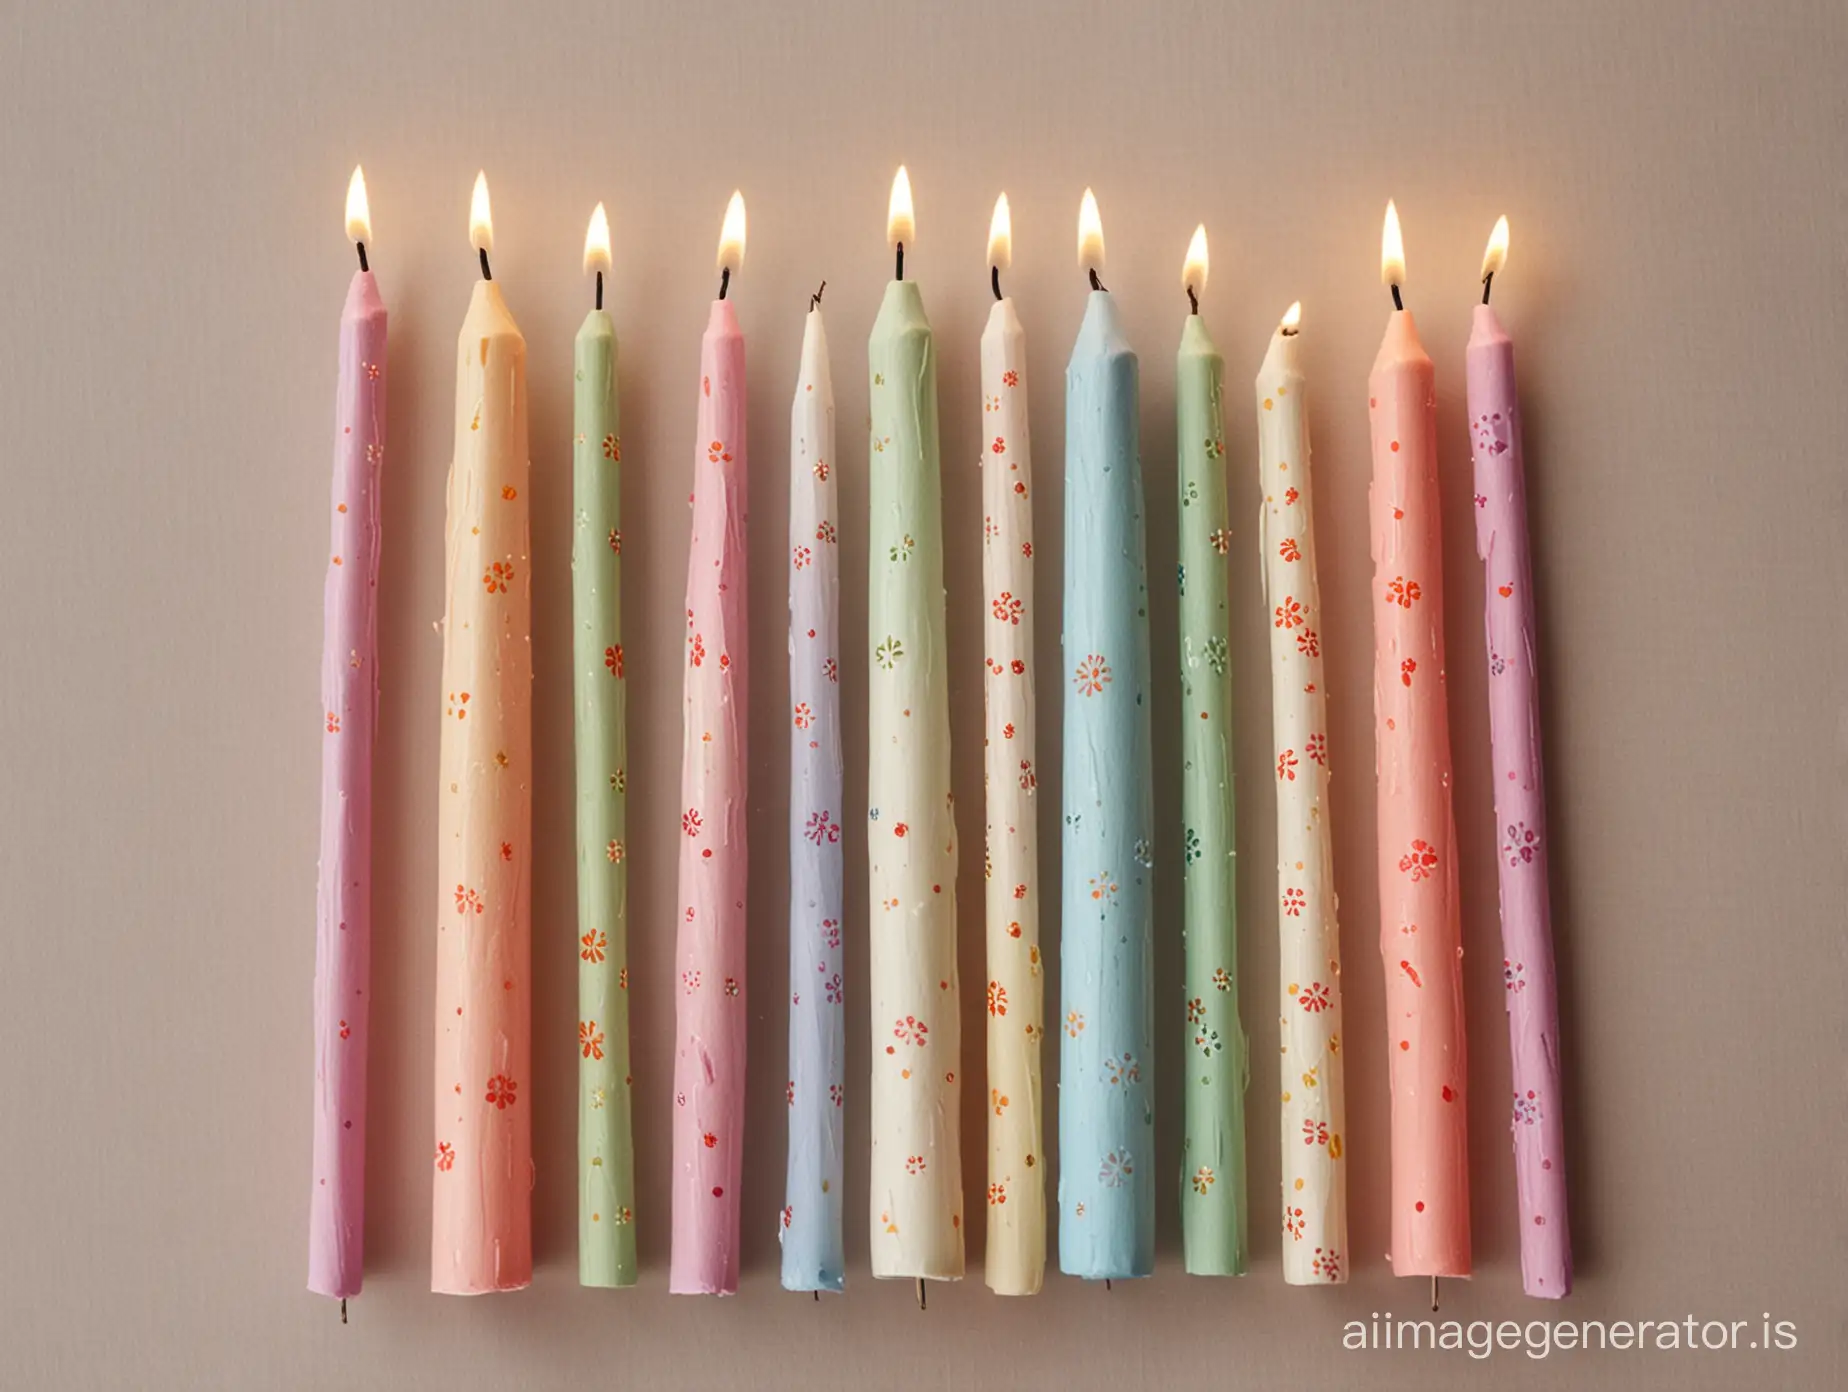 EasterThemed-Thin-Candles-Delicate-Decorative-Elements-for-Festive-Celebrations